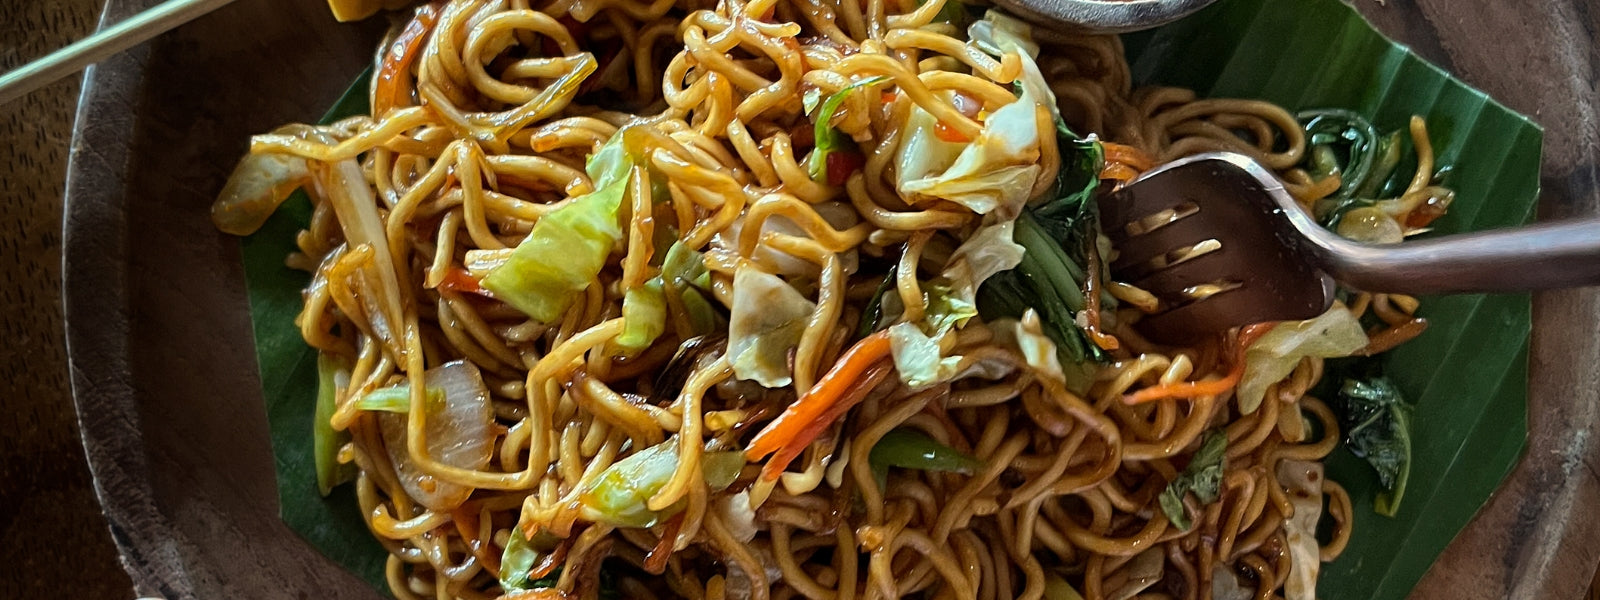 Mie Goreng / Chicken Fried Noodles